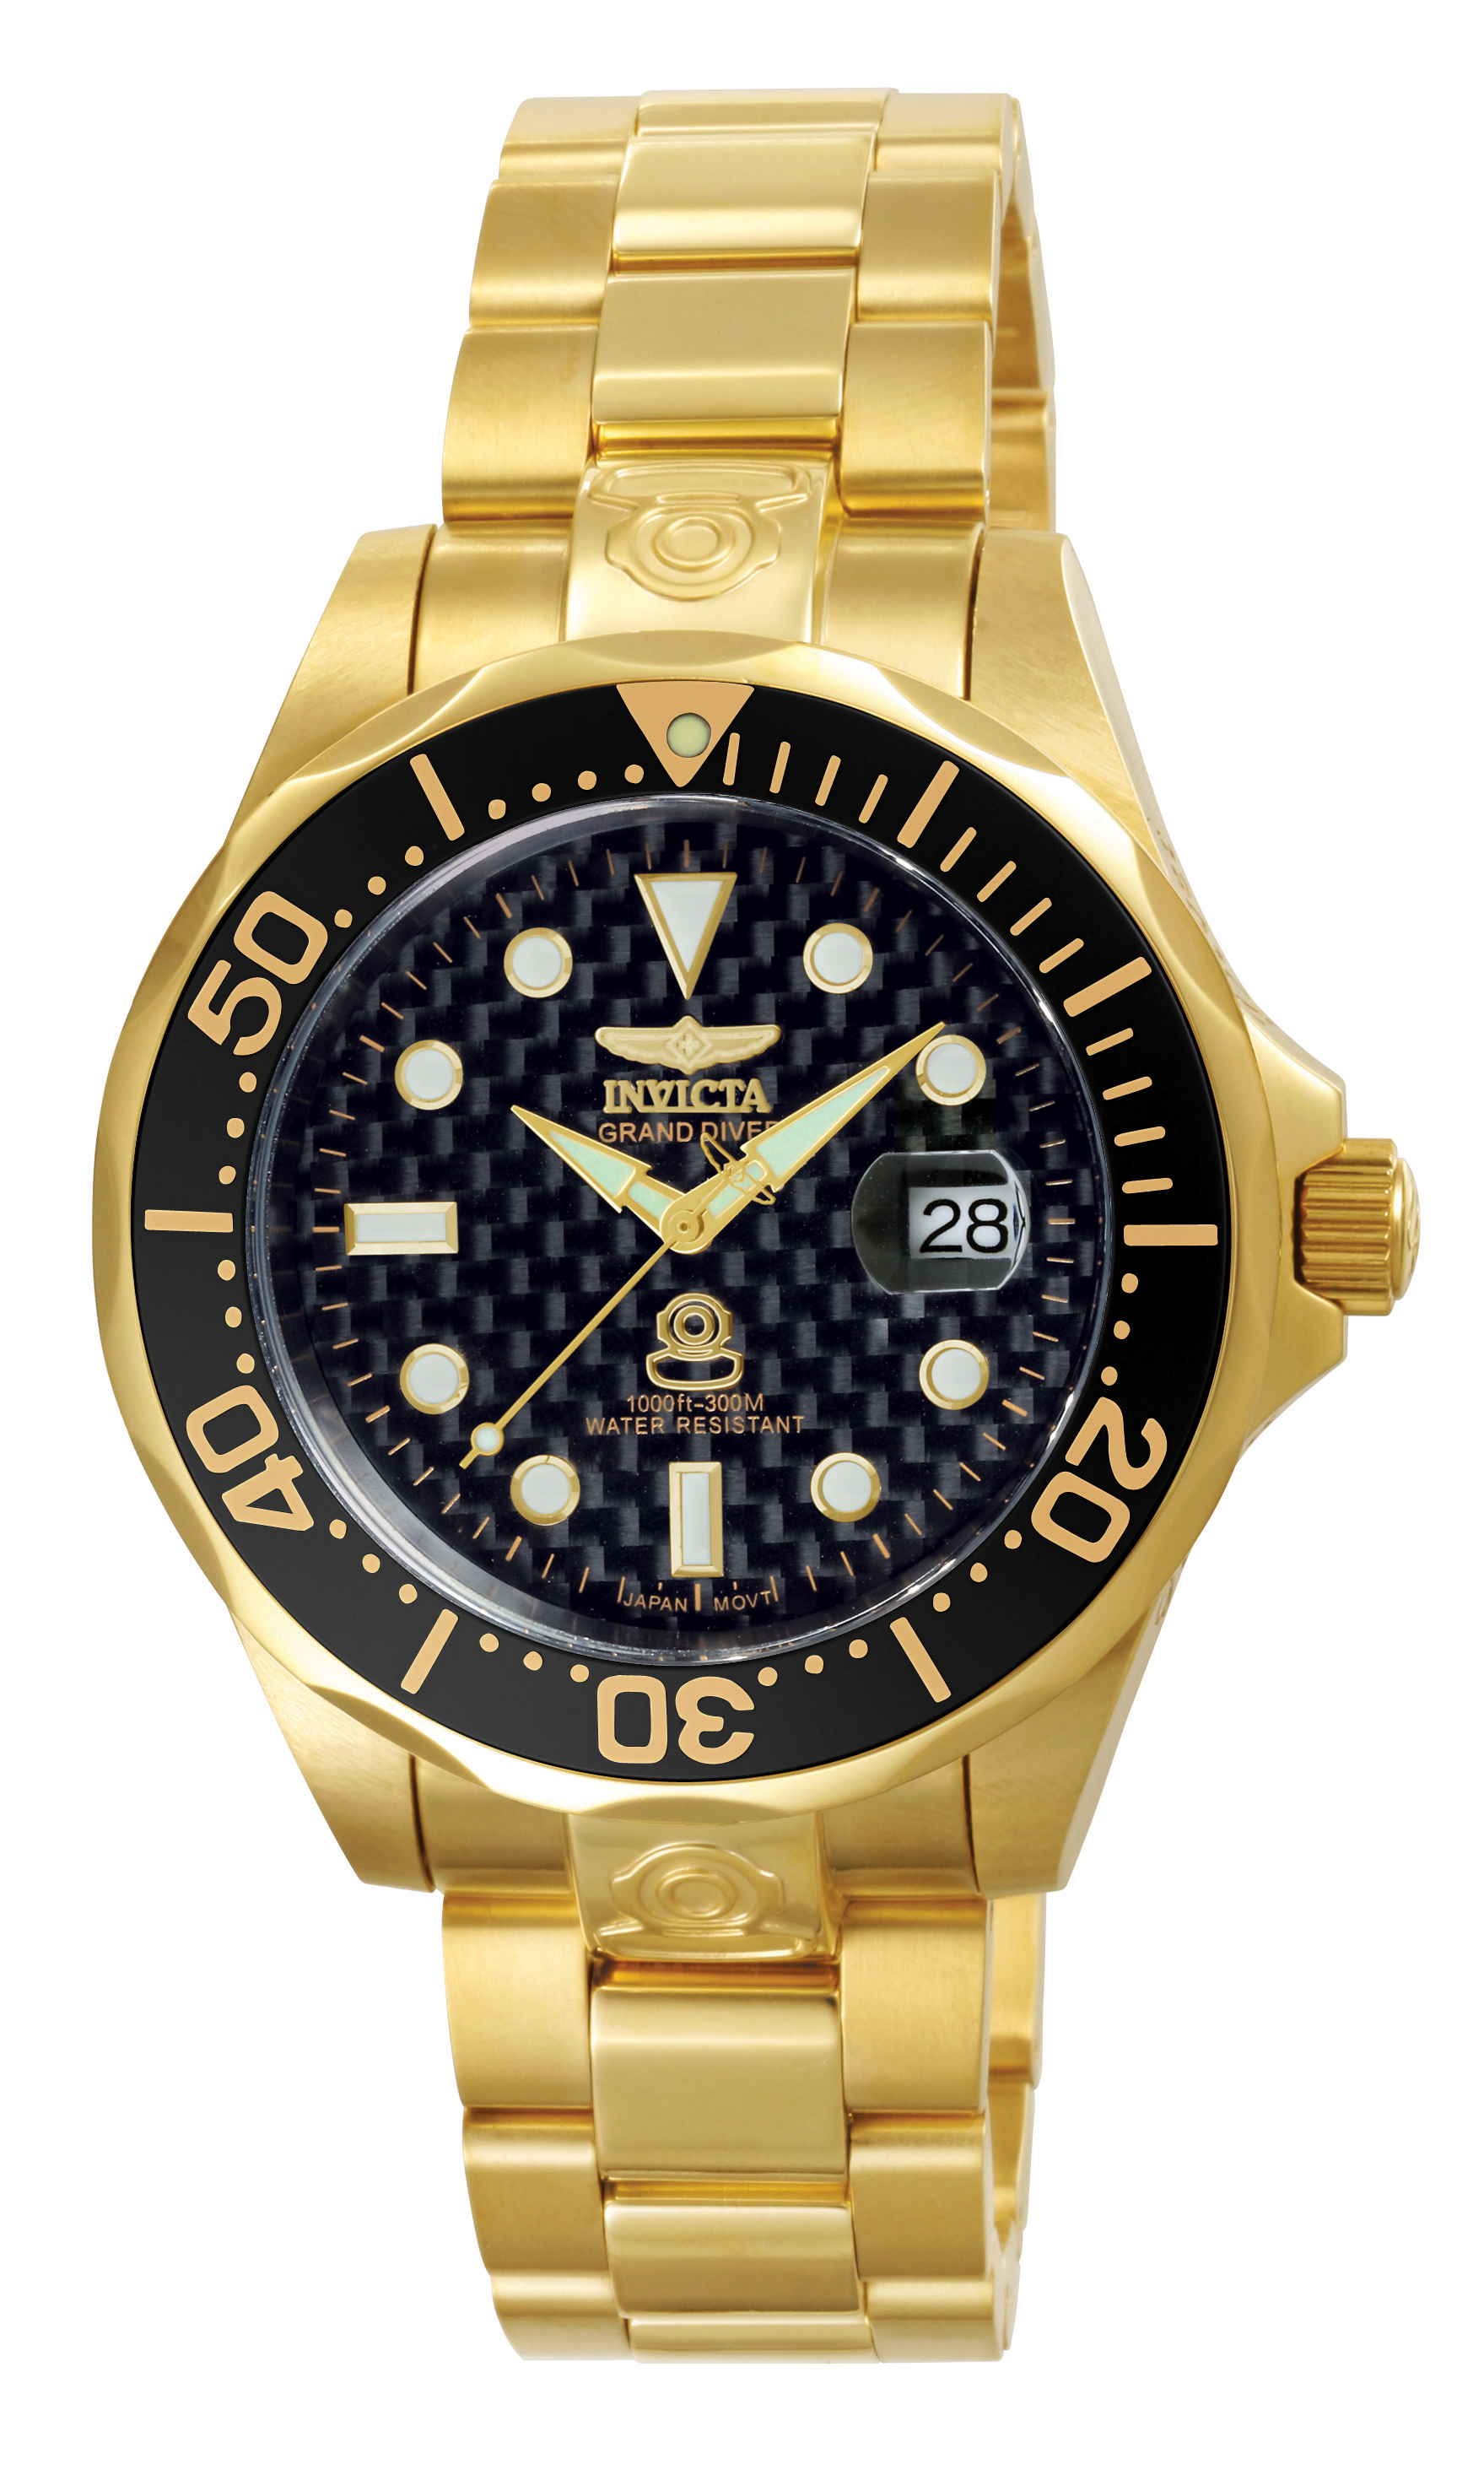 Pre-Owned Invicta Pro Diver Automatic Men's Watch - 47mm Stainless Steel Case, Stainless Steel Band, Gold (AIC-10642)